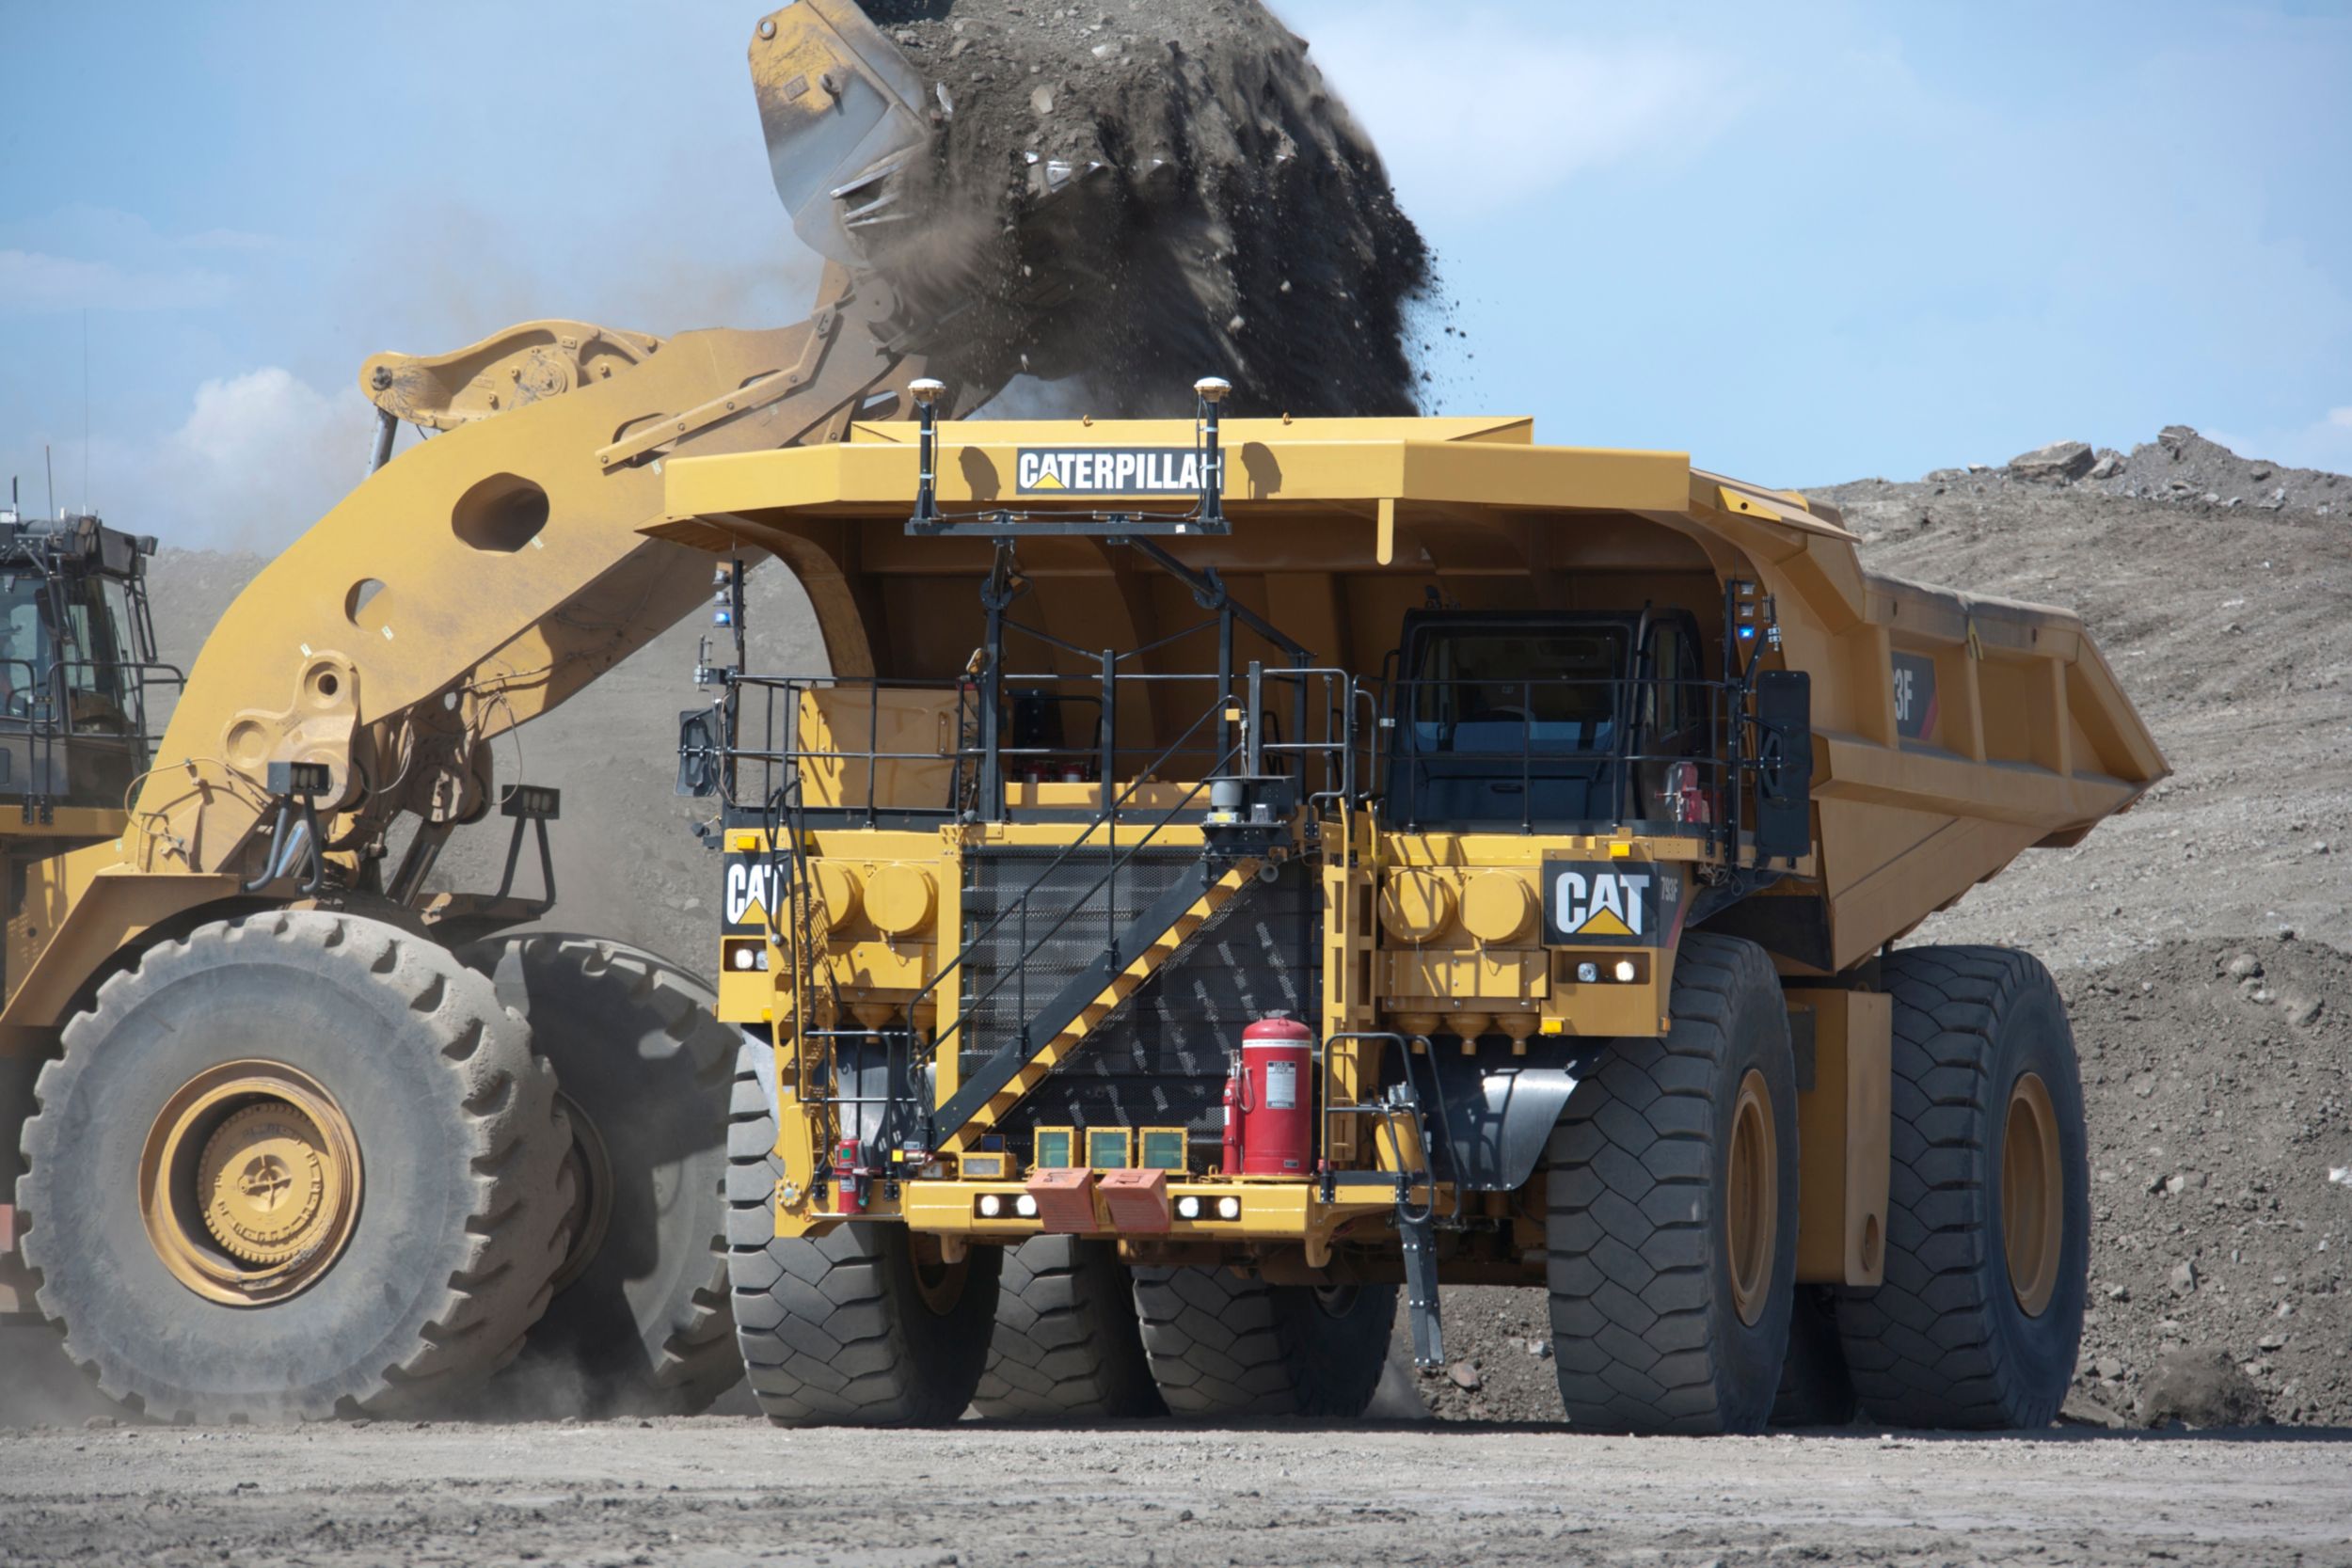 New Caterpillar Mining Equipment Focuses on Reducing Emissions and